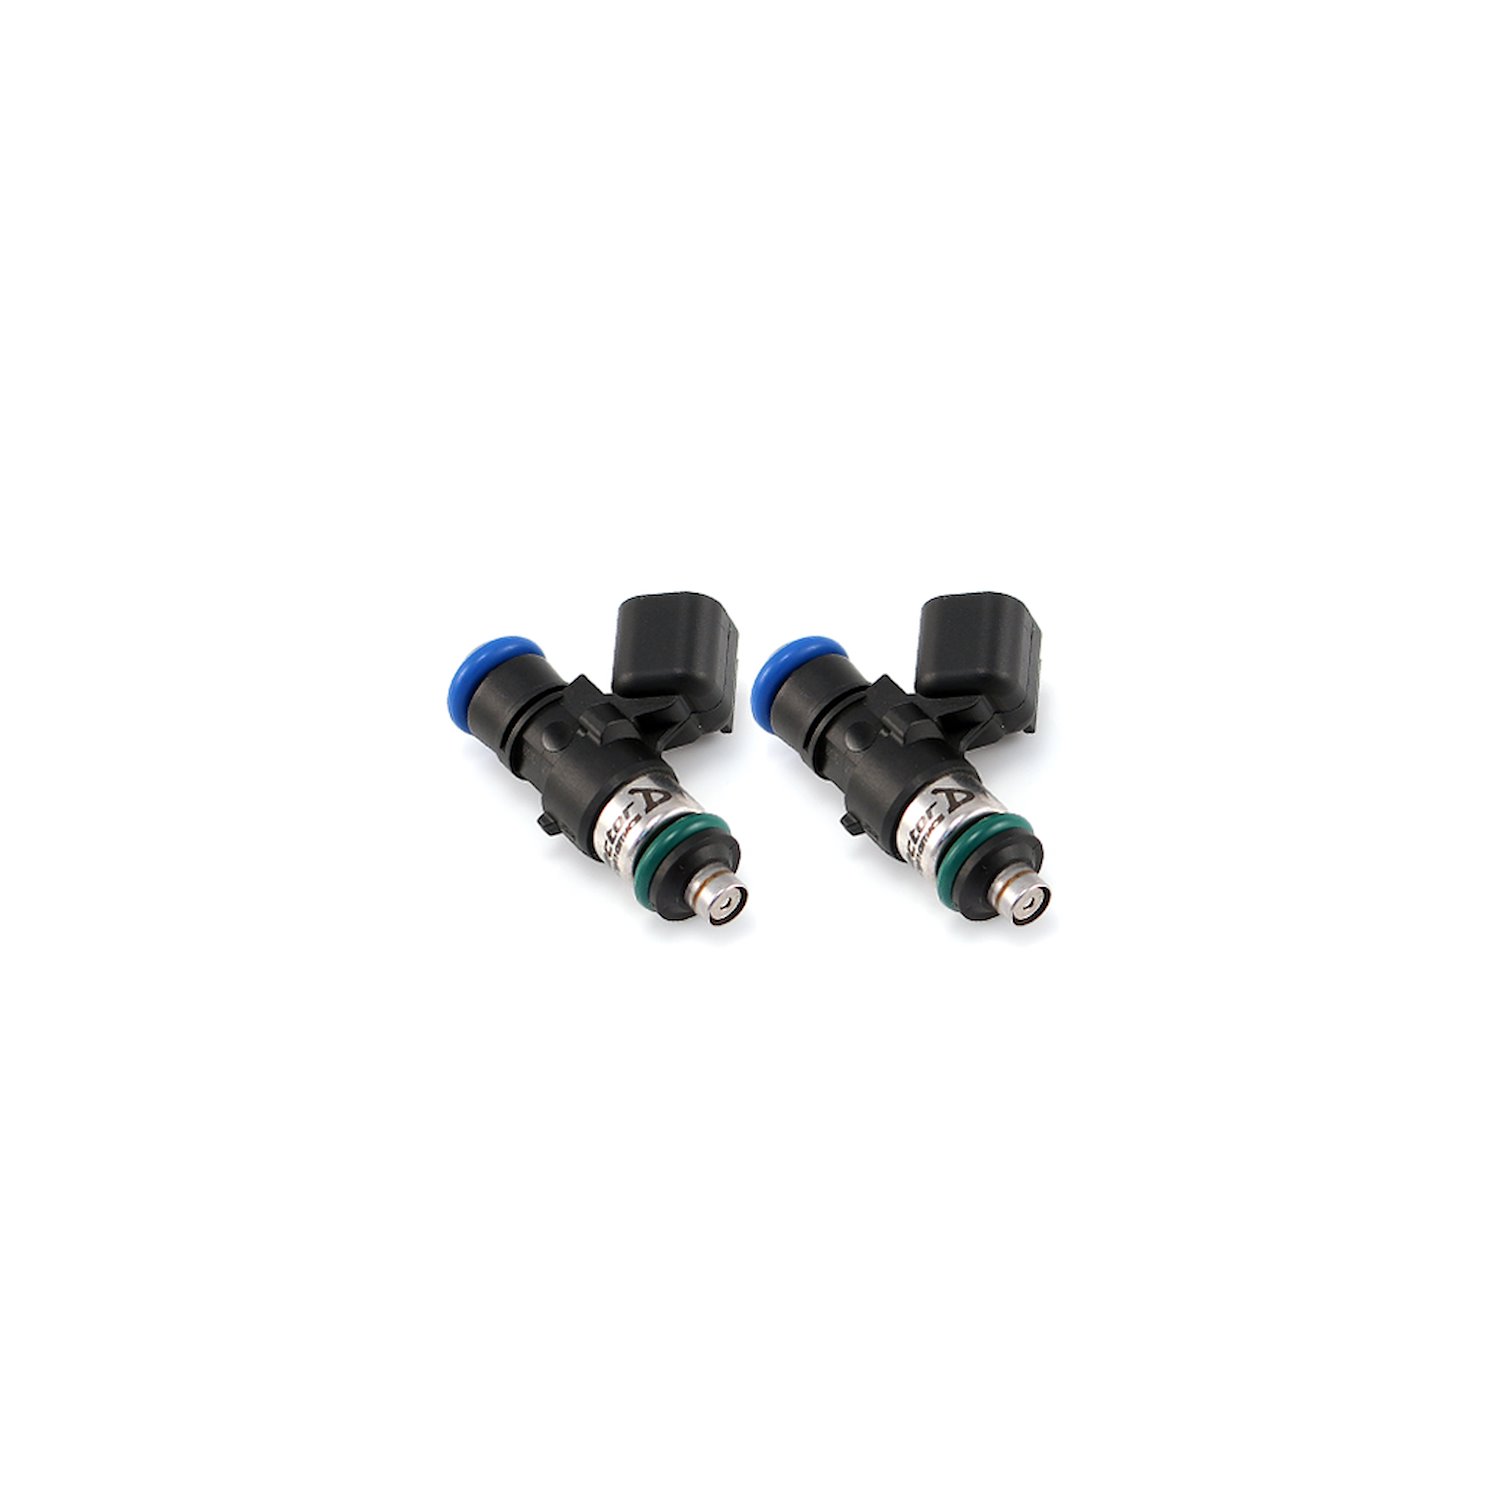 1700.34.14.14.2 1700cc Fuel Injector Set, 34 mm Length, 14 mm Top, 14 mm Lower O-Ring